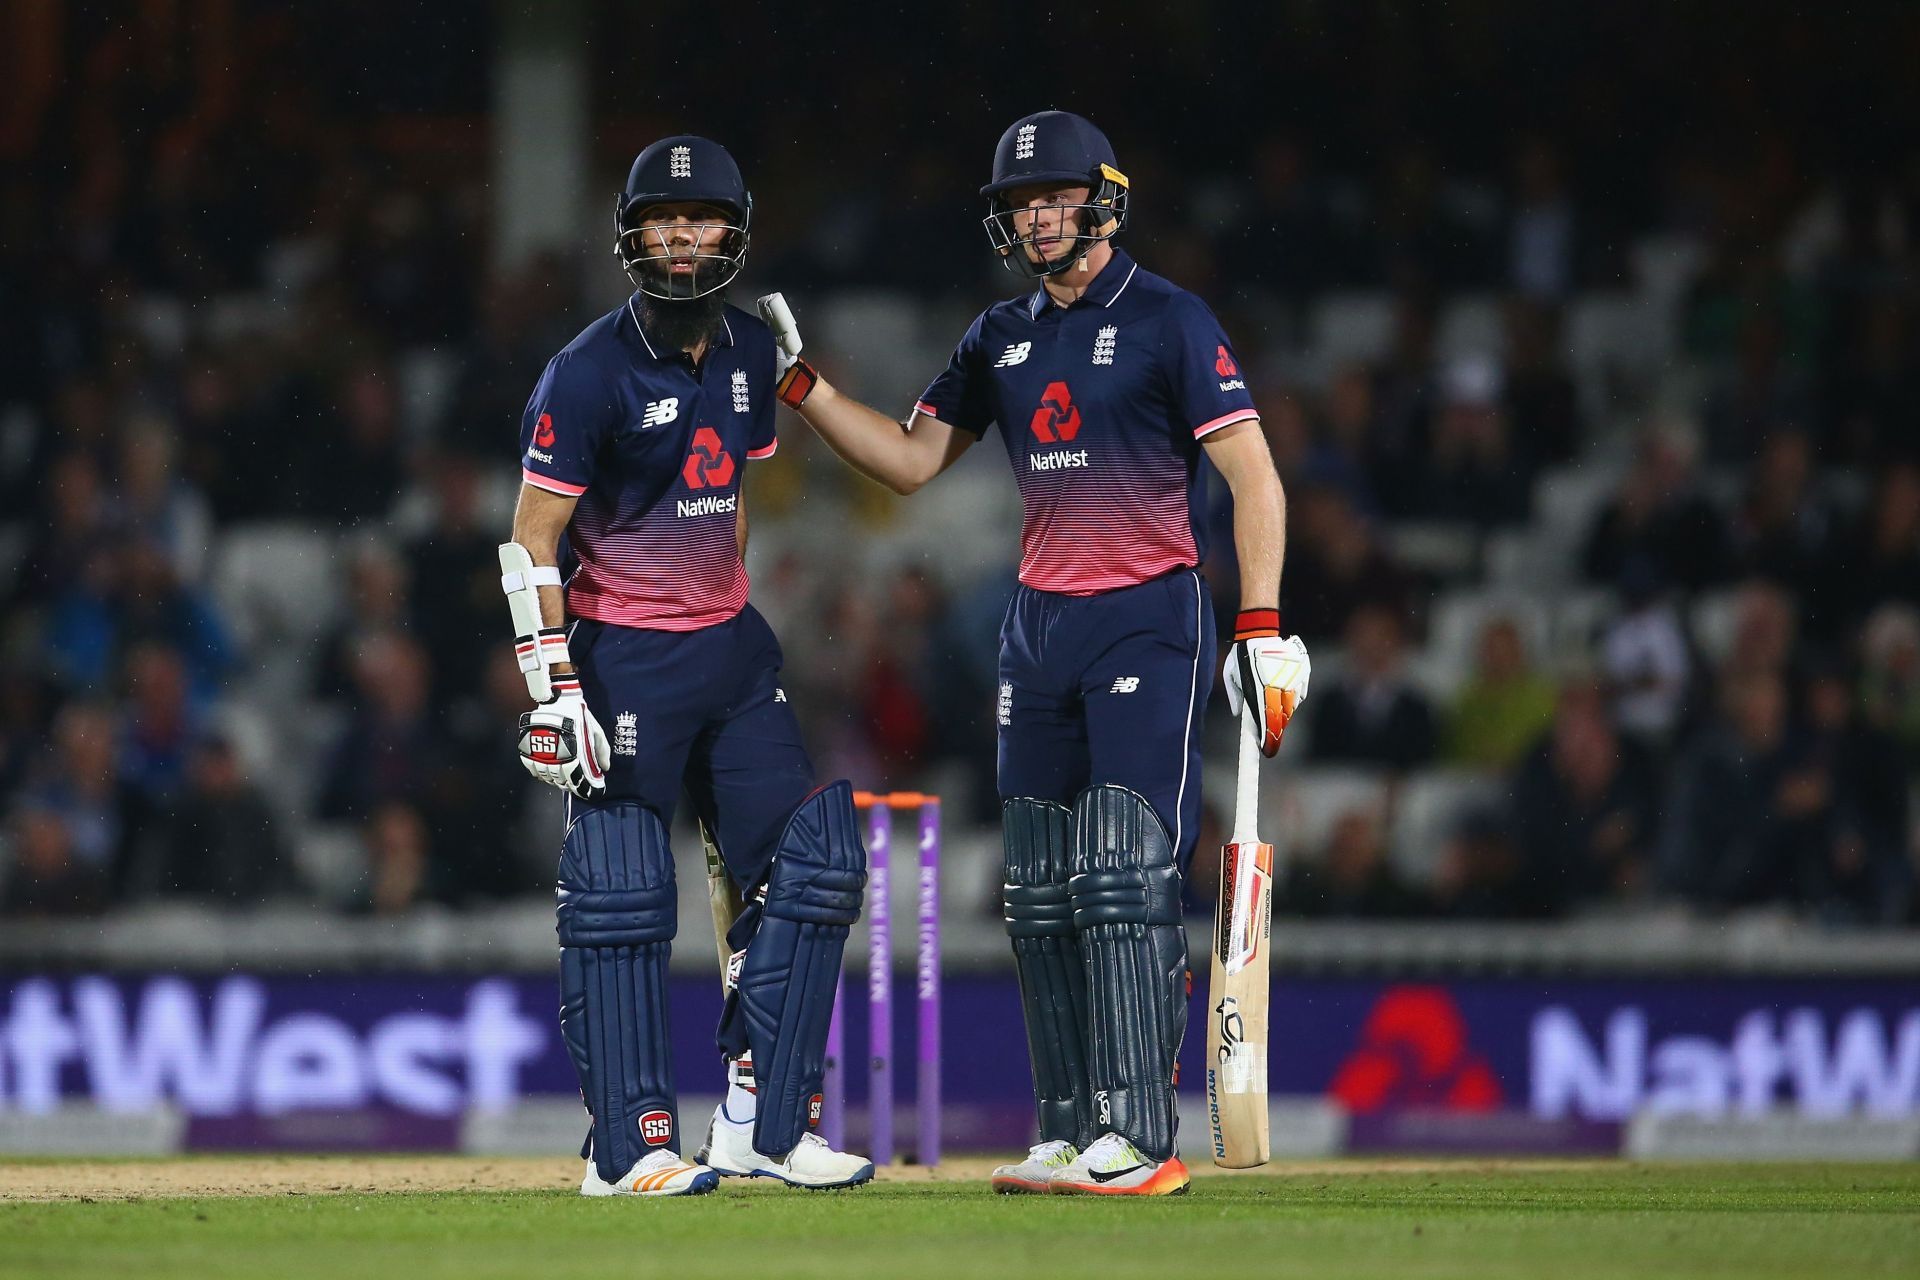 Moeen Ali and Jos Buttler were at the forefront of England accelerating past the DLS par score in the 4th ODI in 2017.